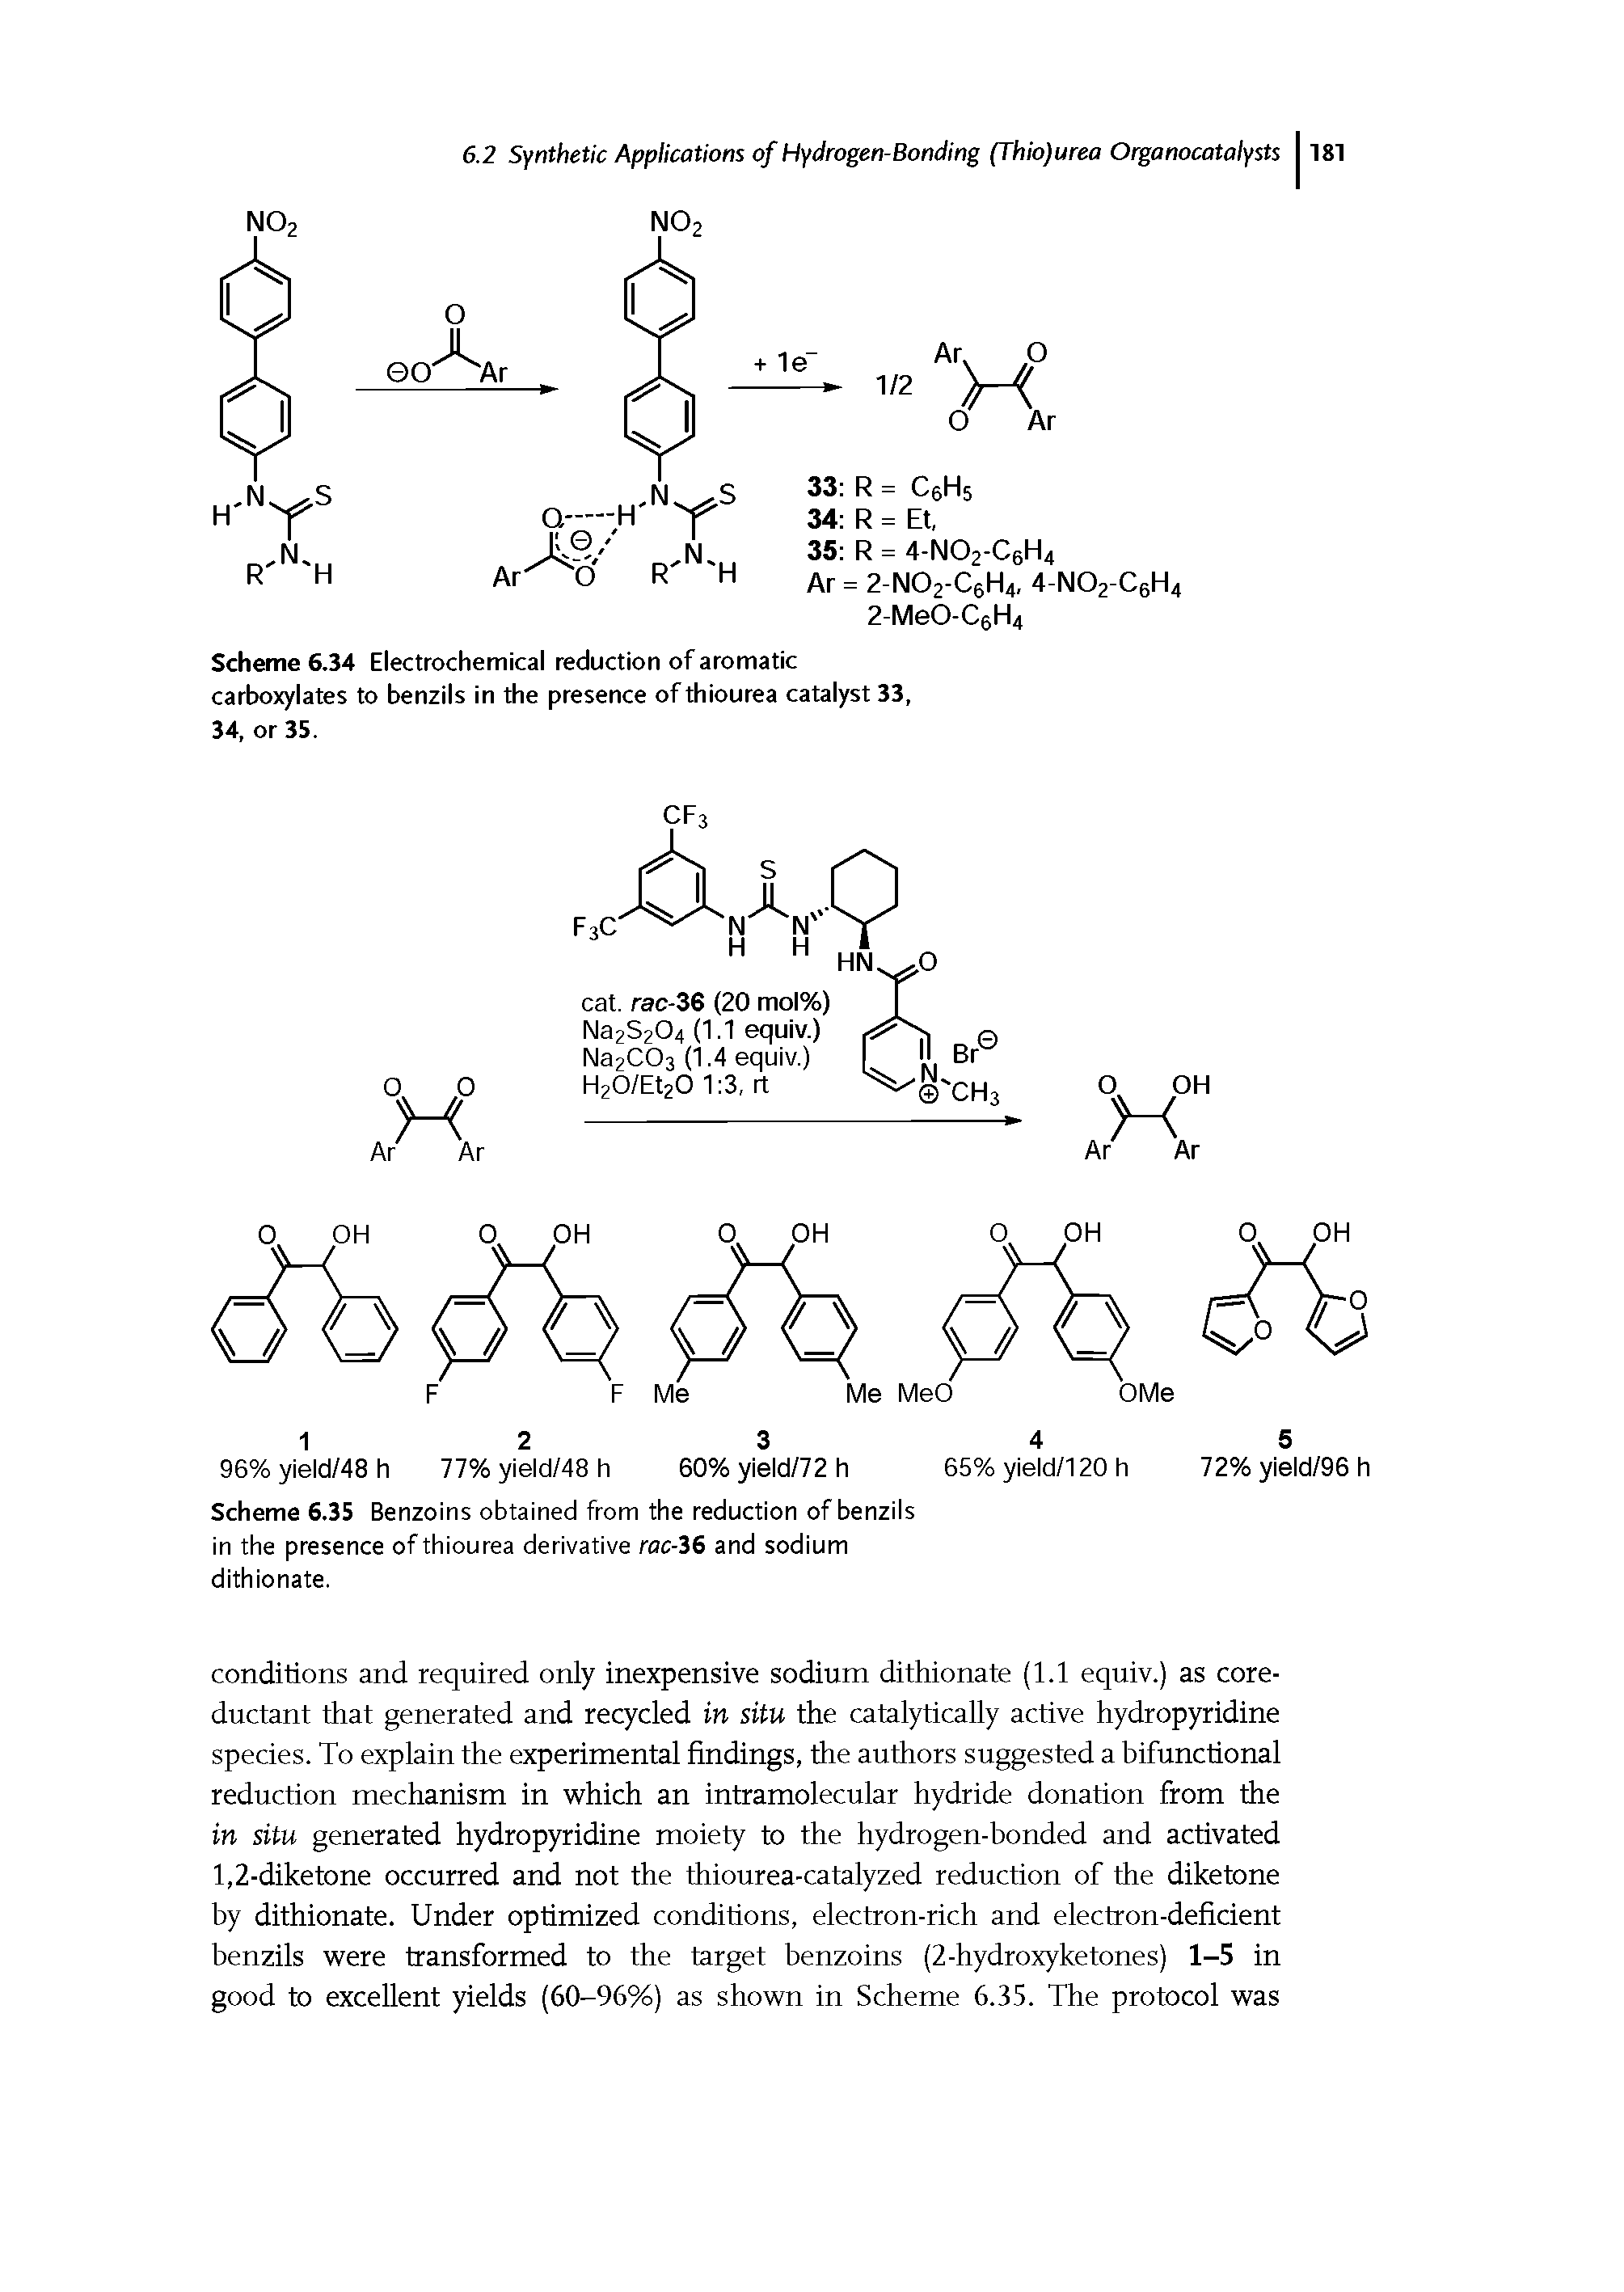 Scheme 6.34 Electrochemical reduction of aromatic carboxylates to benzils in the presence of thiourea catalyst 33, 34, or 35.